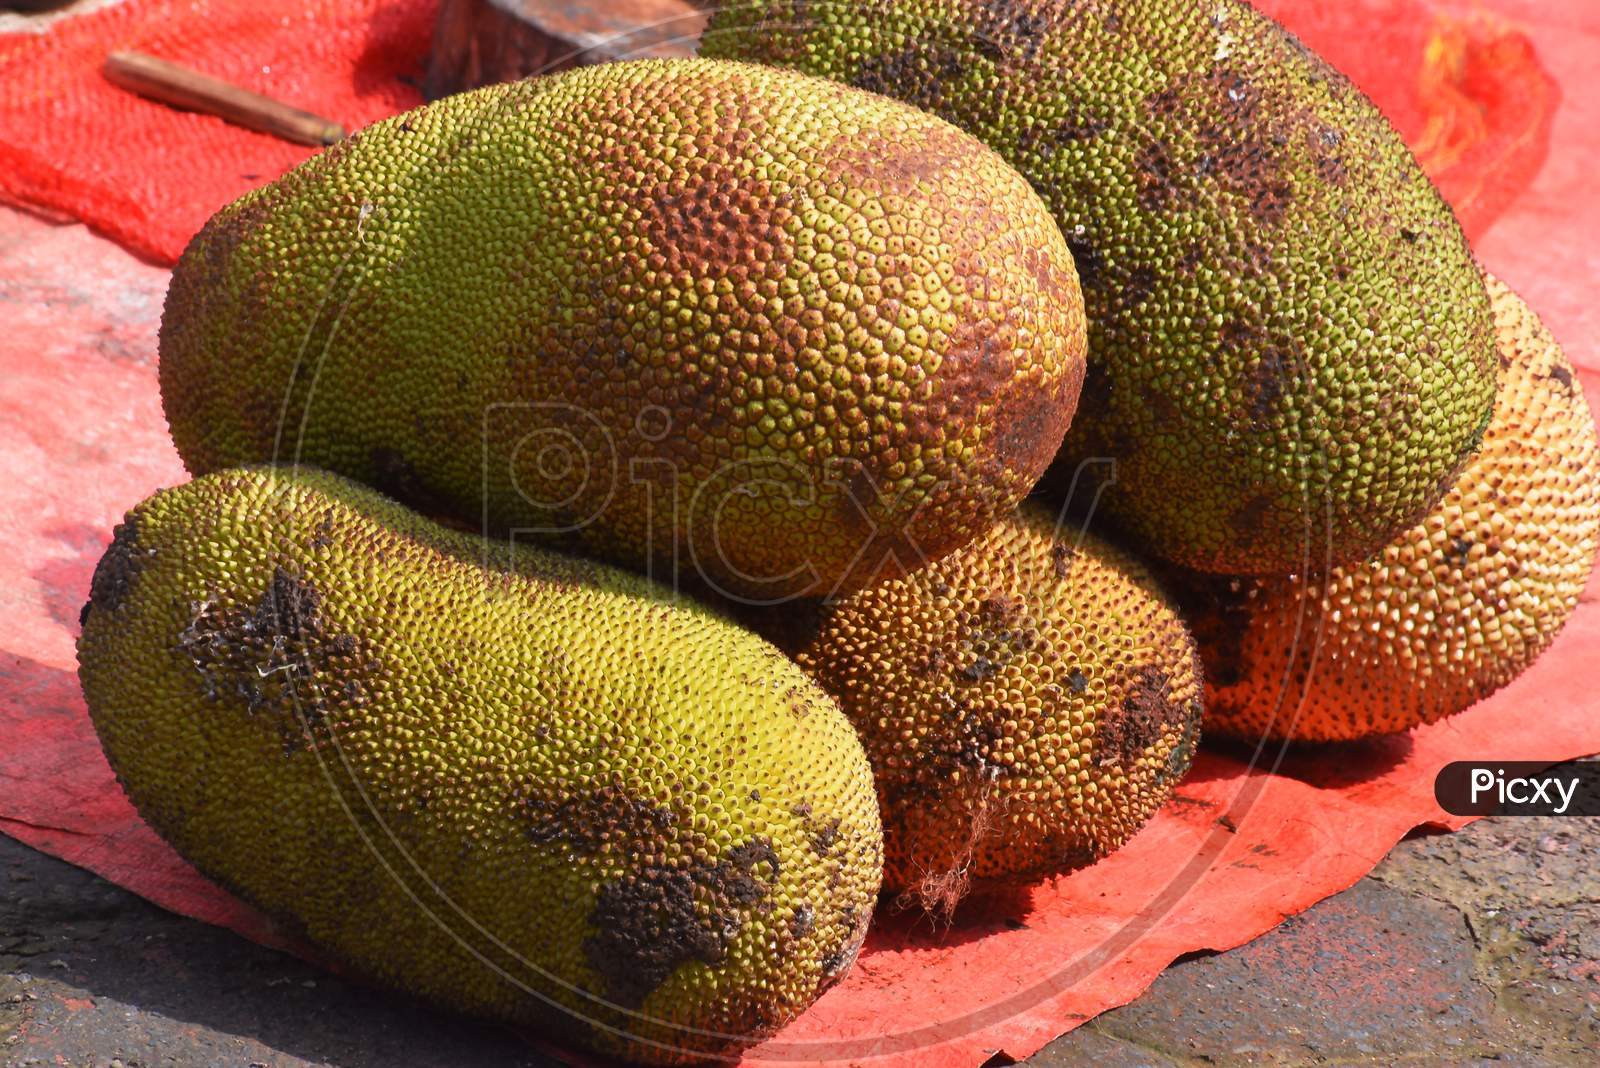 Jack-Fruit That Is Beautifully Arranged On Red Plastic. Jack-Fruit Or Genus Is Tropical Fruit That Has A Sweet And Very Fragrant Flavor.